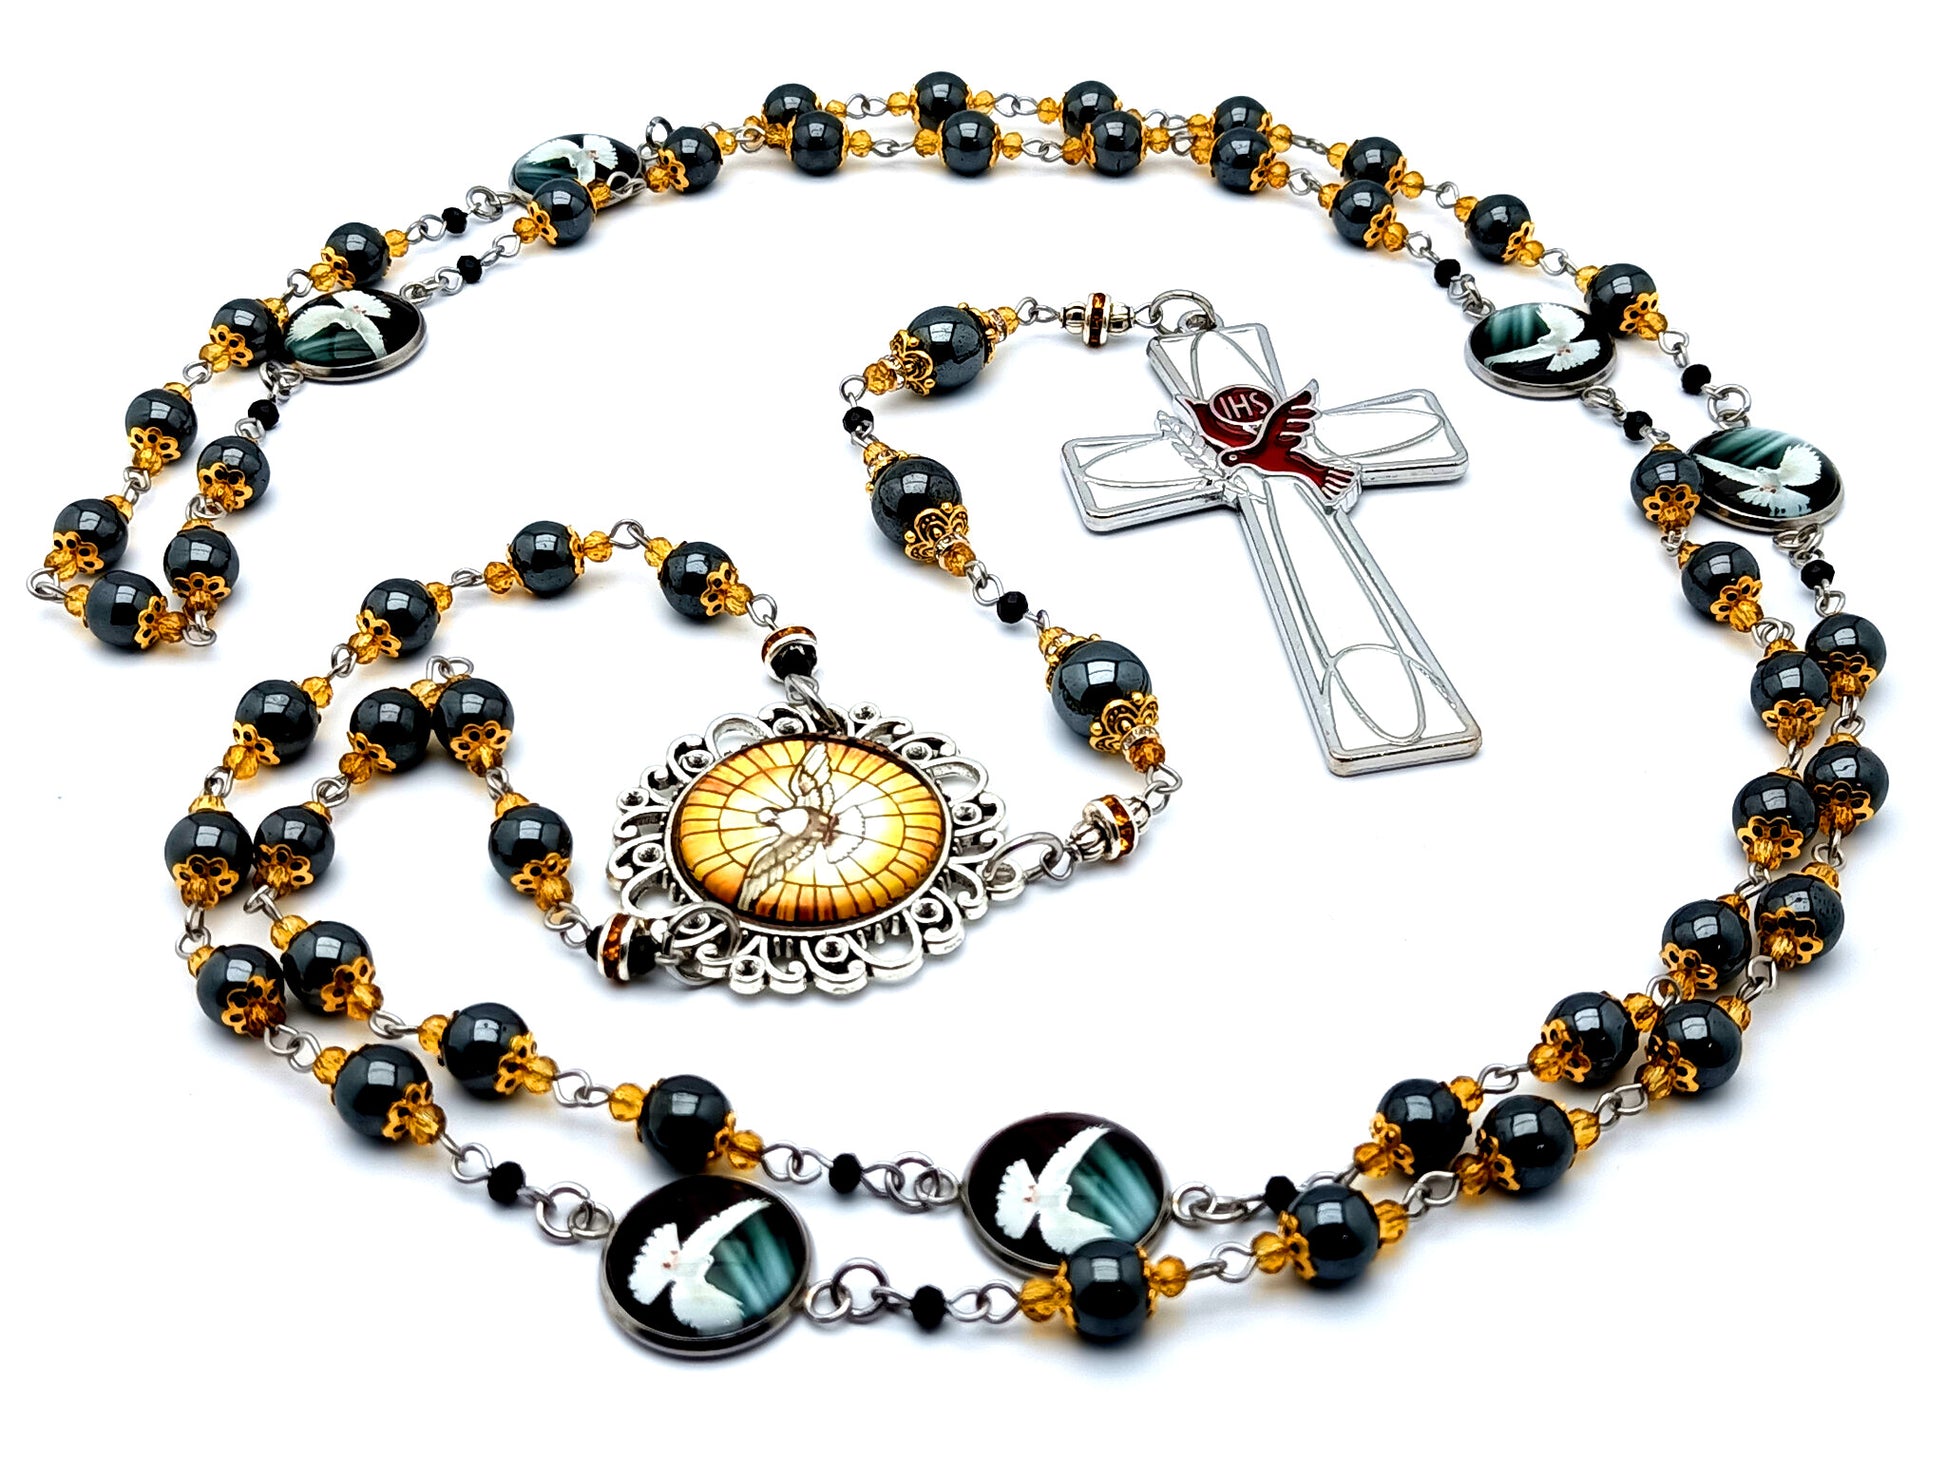 Holy Spirit unique rosary beads prayer chaplet with hematite gemstone beads and Holy Ghost enamel cross and domed linking picture medals.